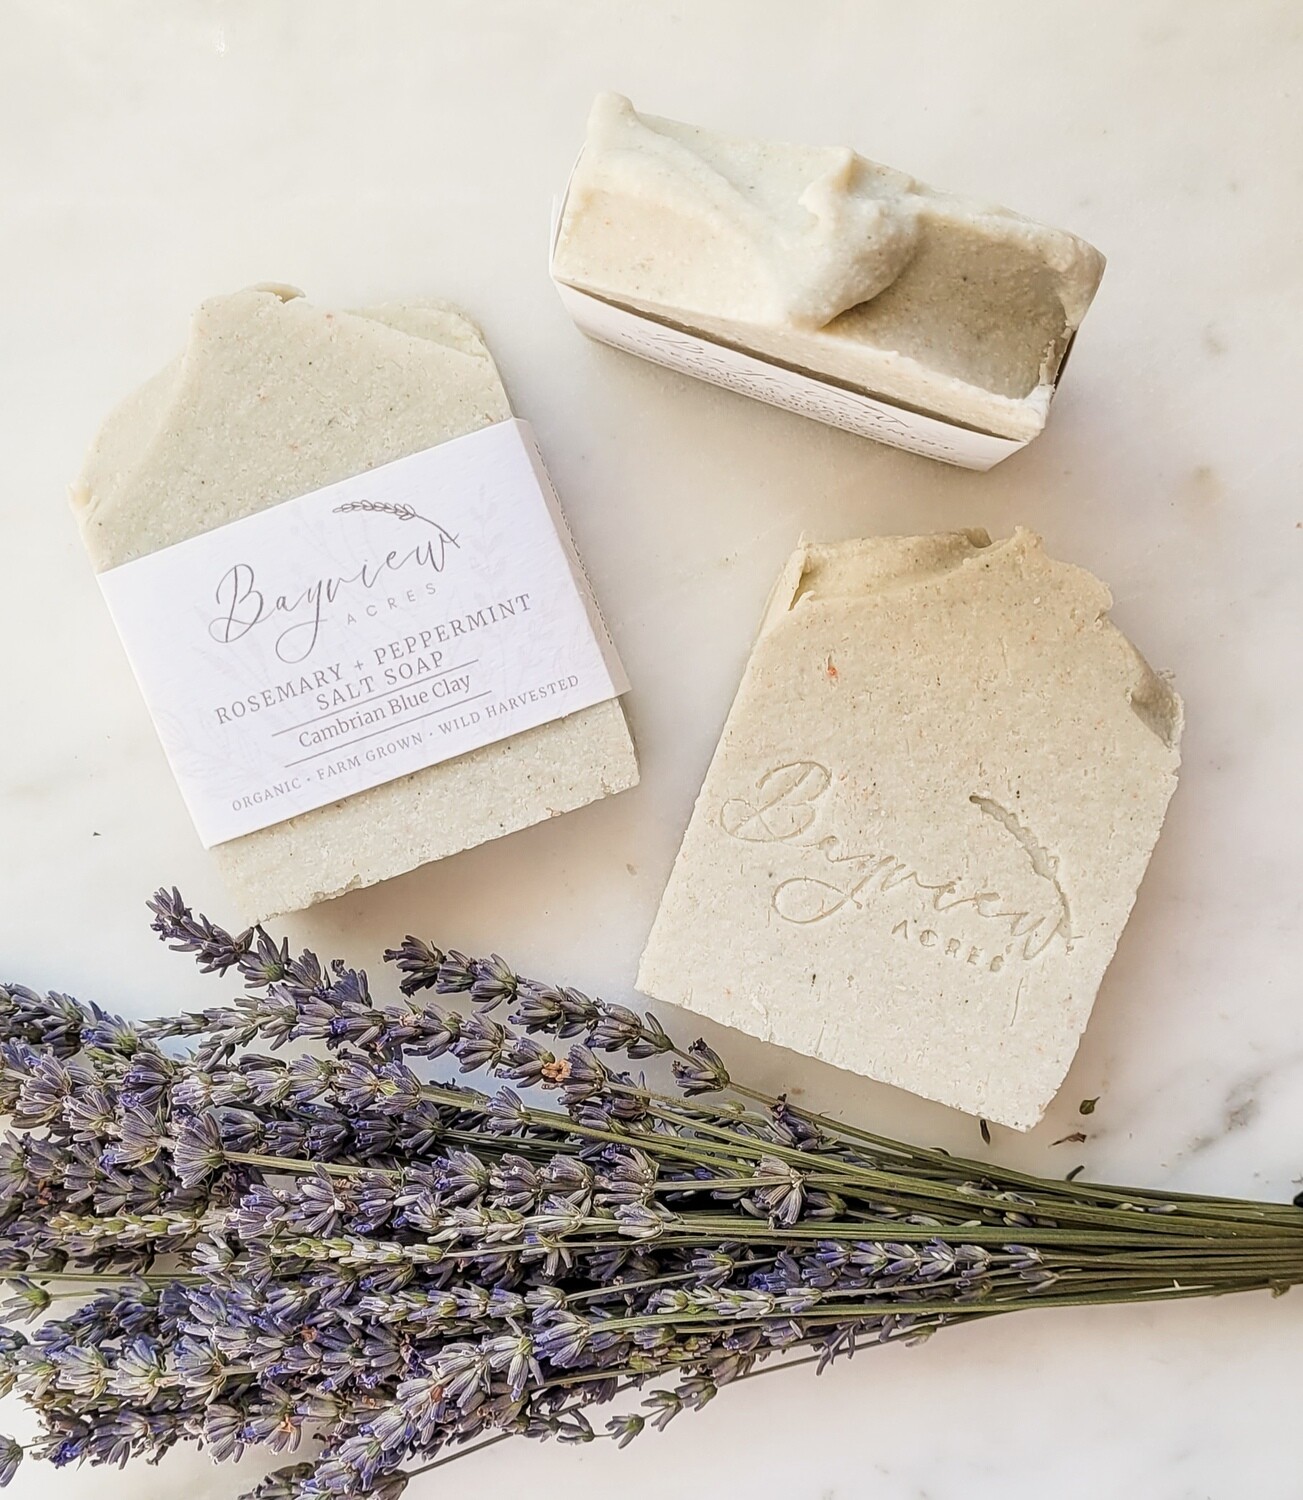 Rosemary and Peppermint Salt Soap